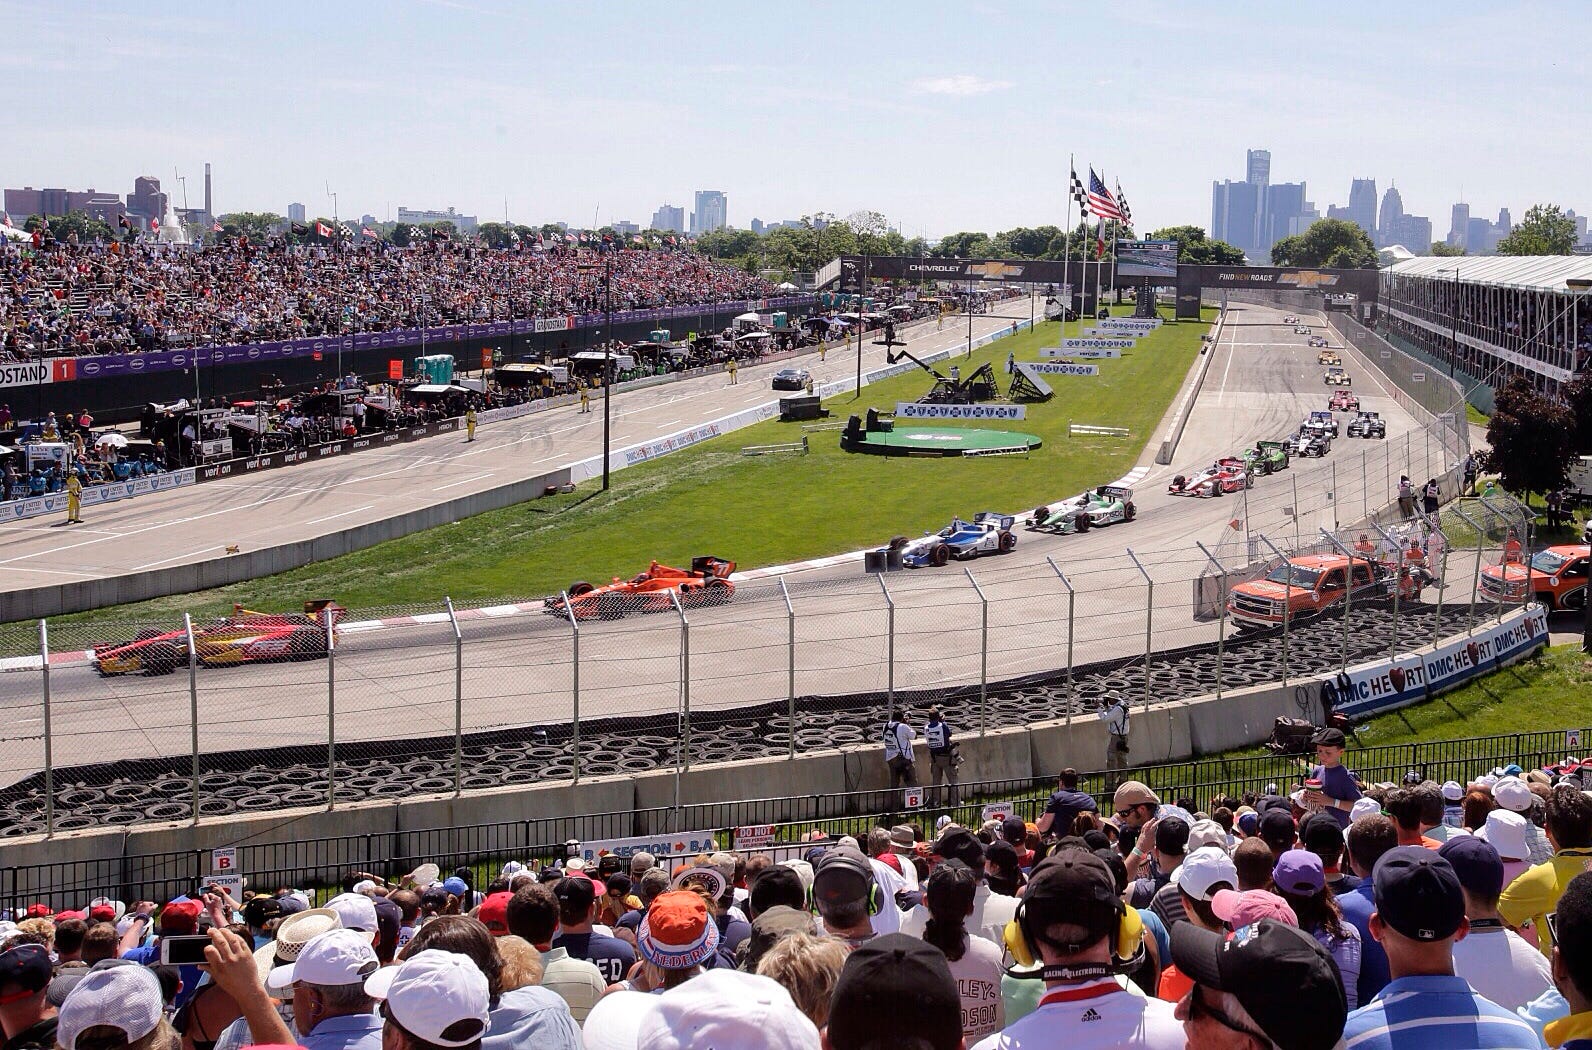 IndyCar's schedule change: Three races added, including one at Indianapolis Motor Speedway; Detroit race canceled